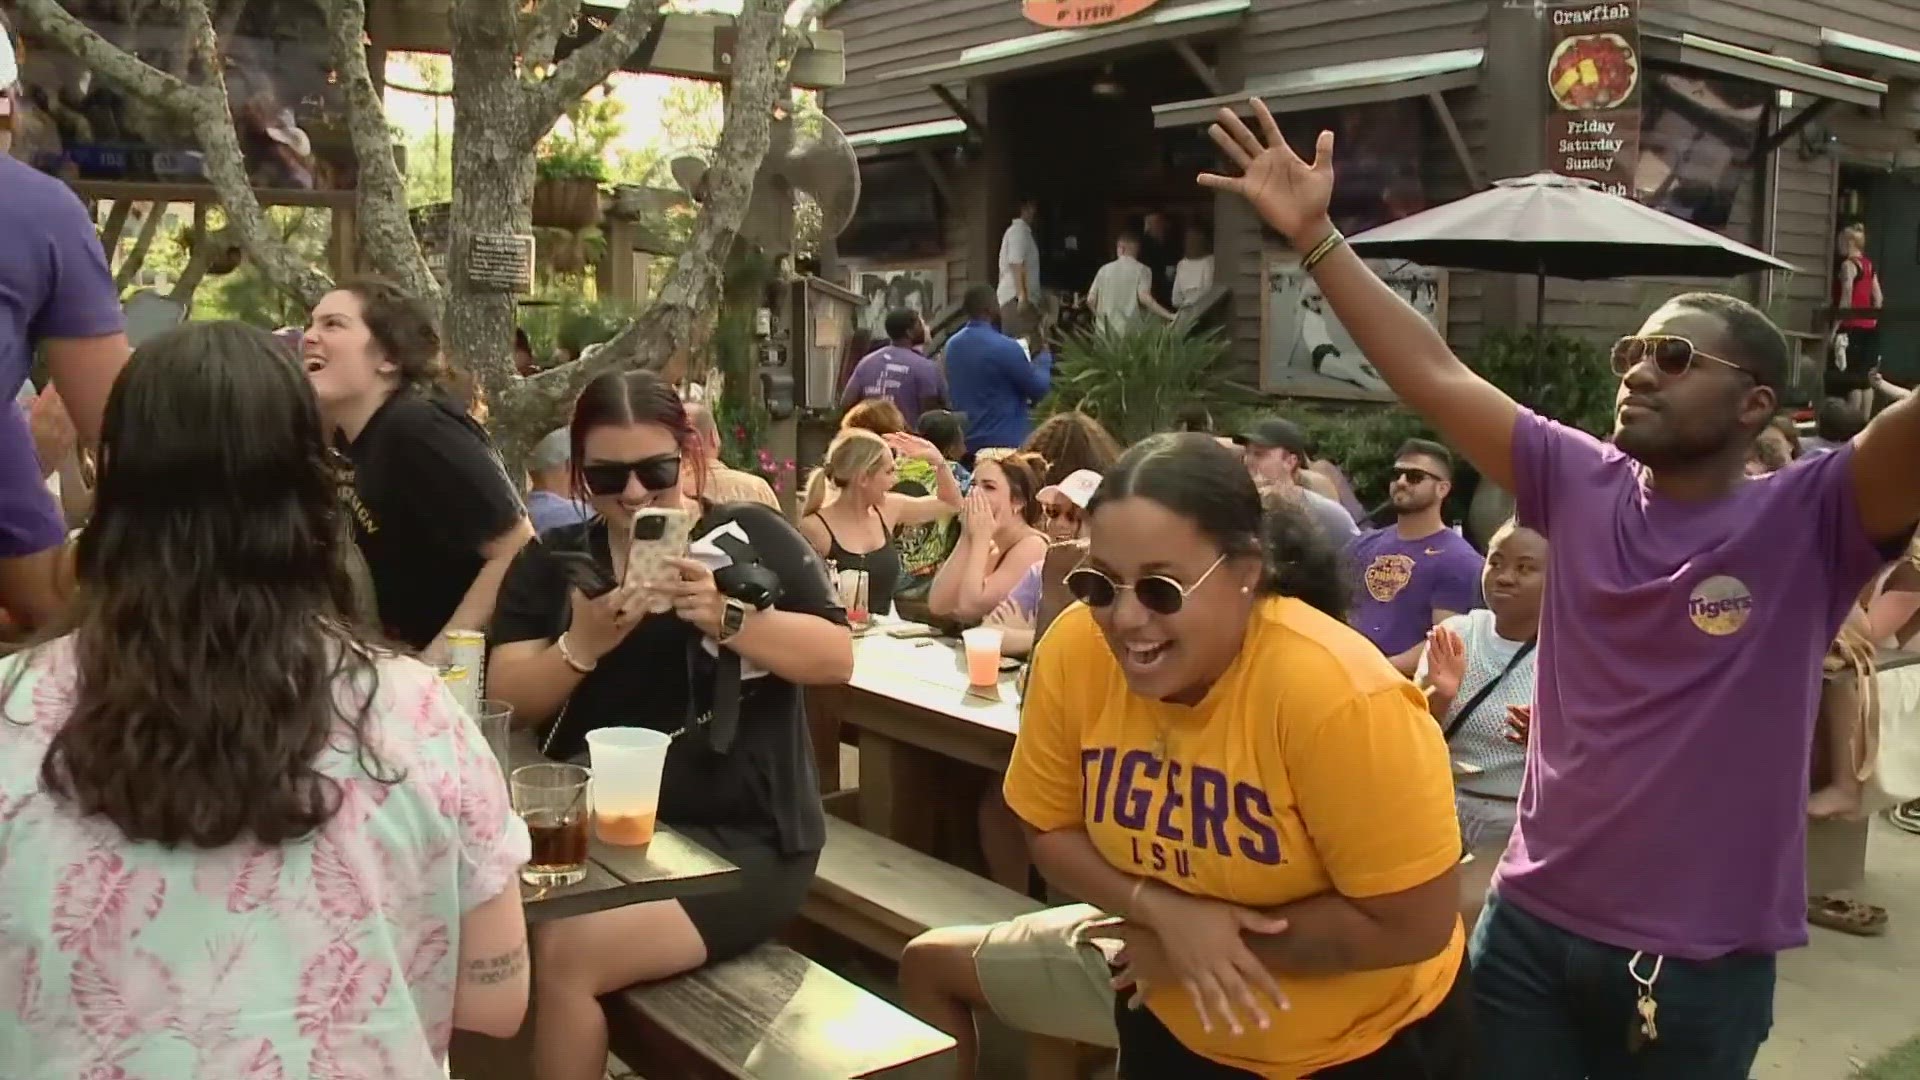 The Wrong Iron Bar in Mid-City was getting pretty festive as LSU fans celebrated winning the Women's Basketball title on Sunday.